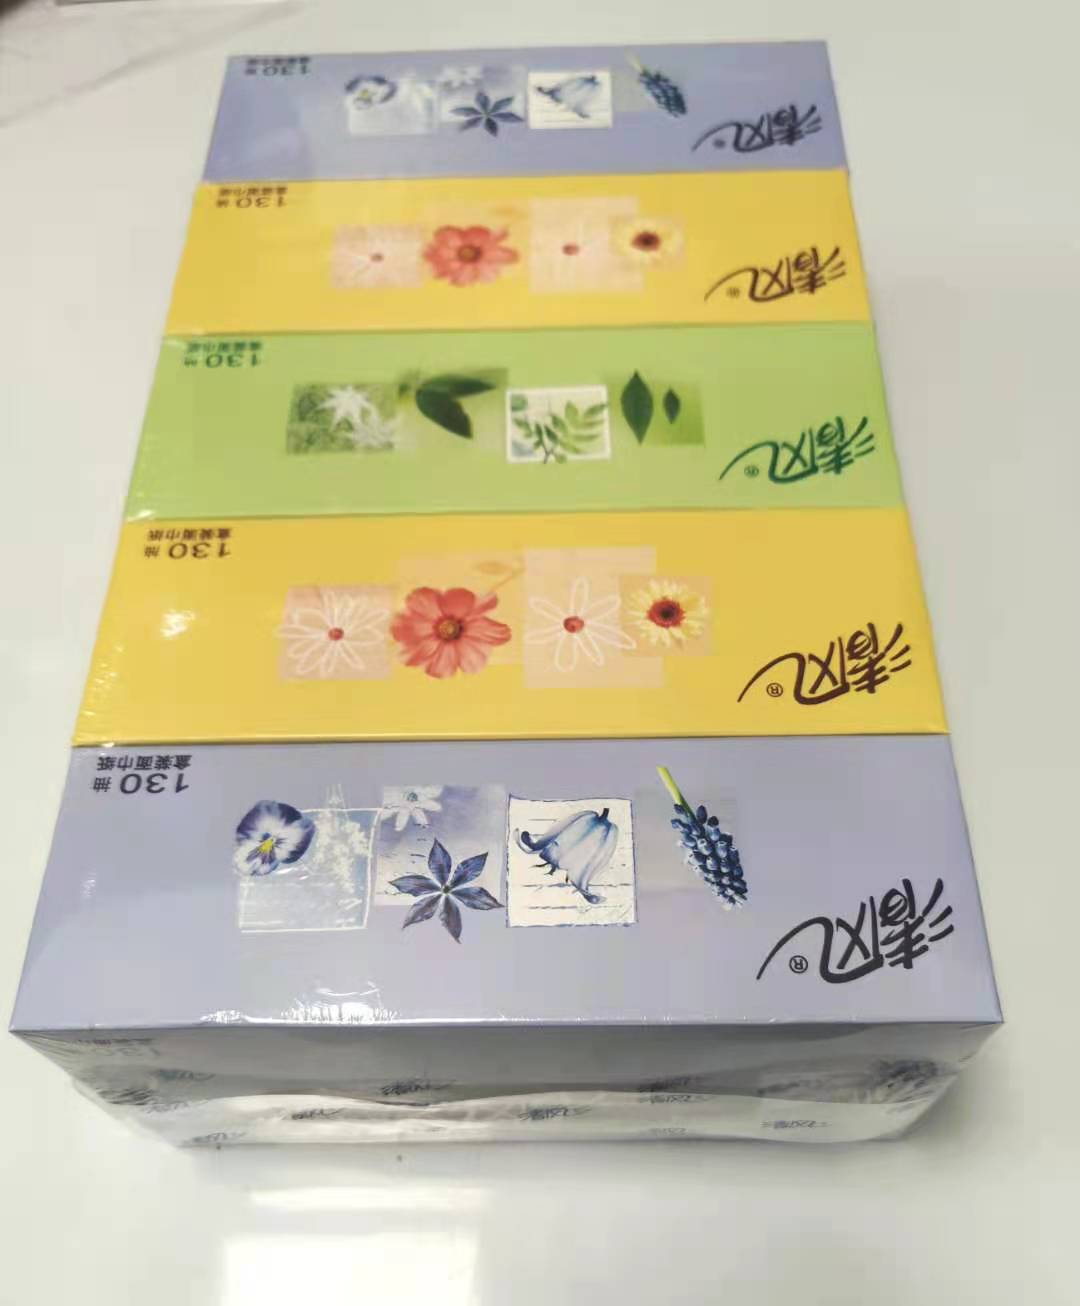 SOFT FACIAL TISSUE PAPER BOX QING FENG 130 SHEETS/BOX 5PACK/PACKAGE $4.99/PACKAGE ##